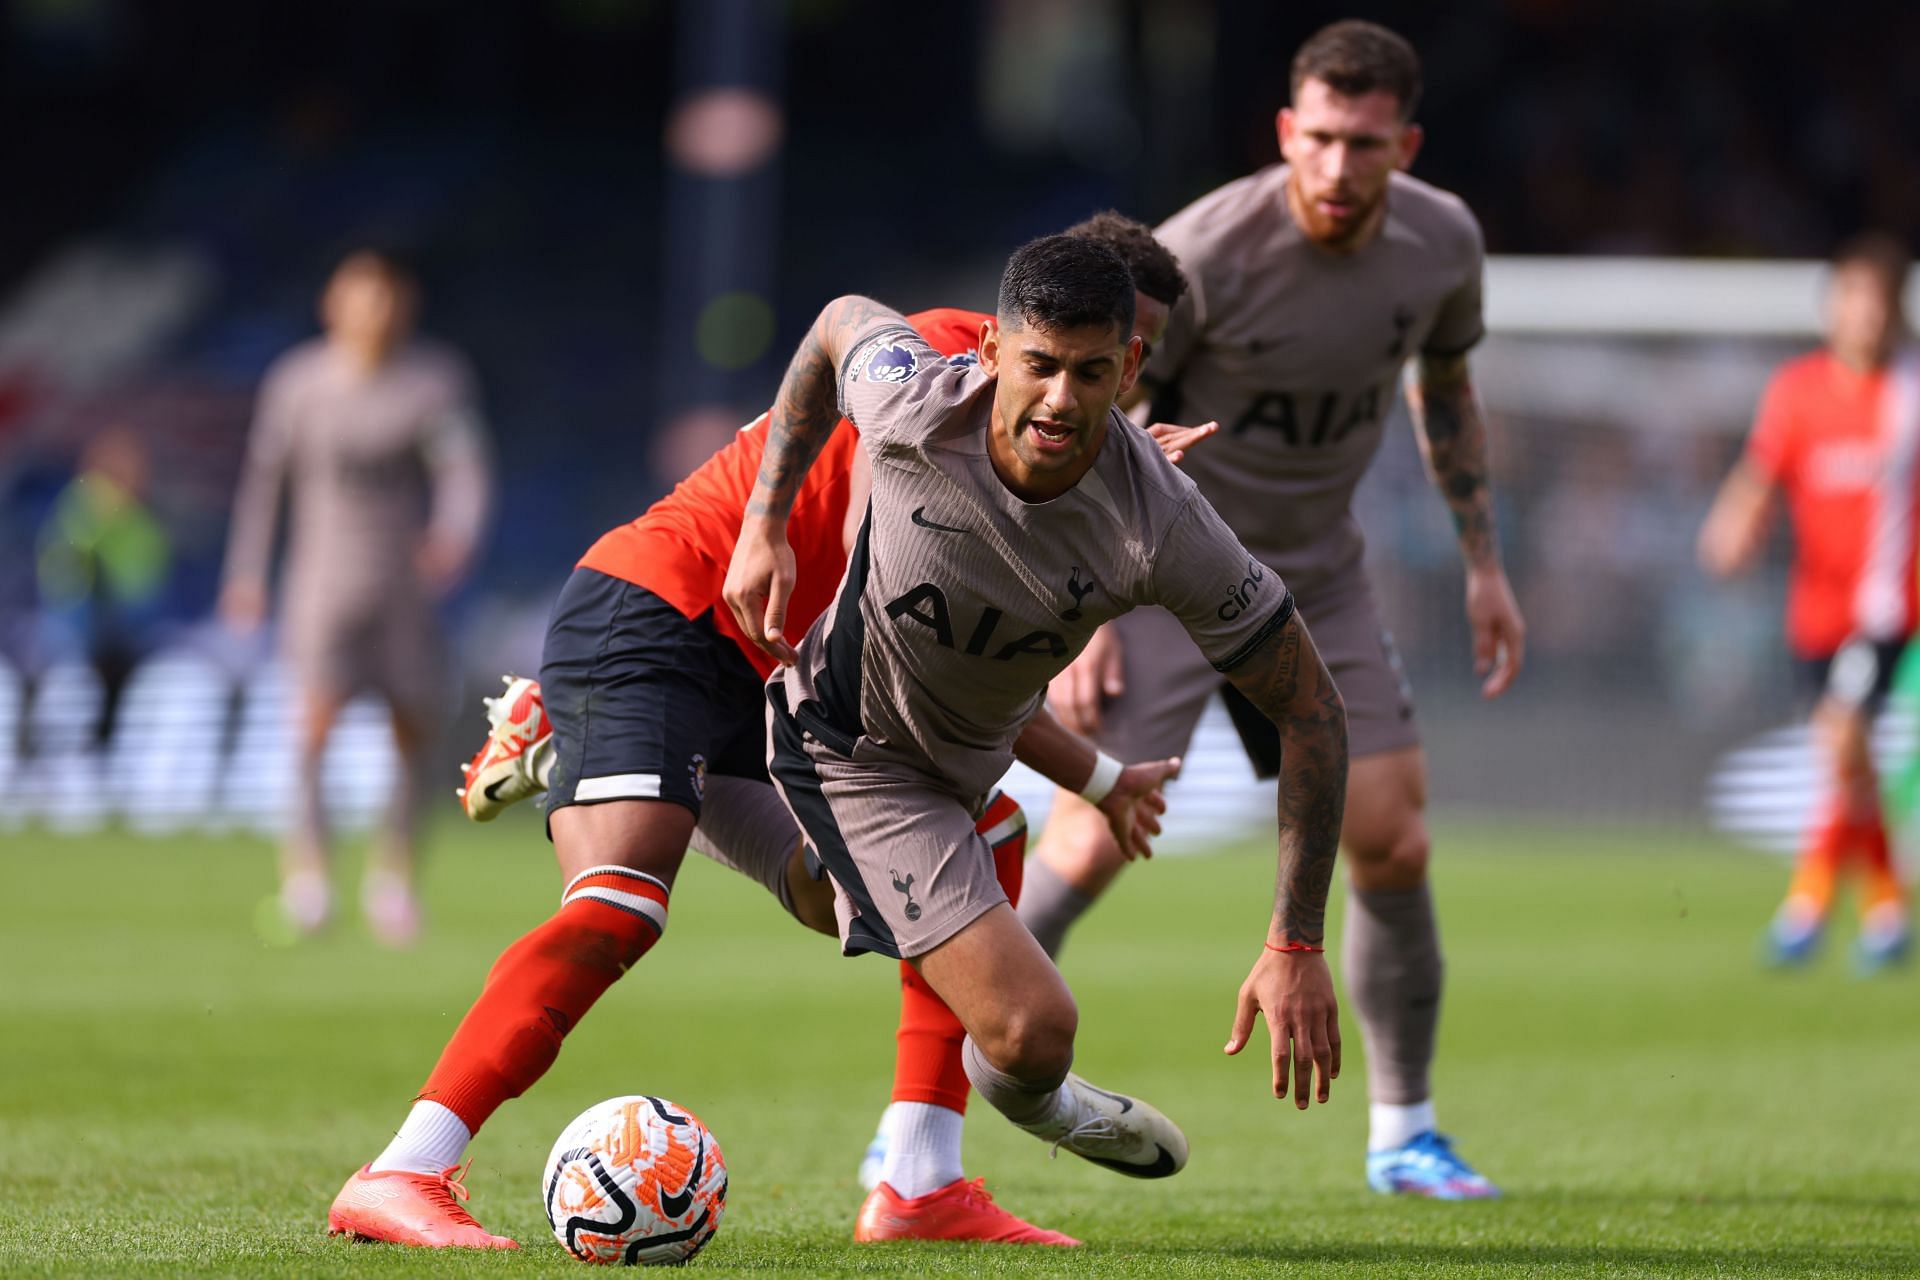 Luton Town take on Tottenham Hotspur this weekend